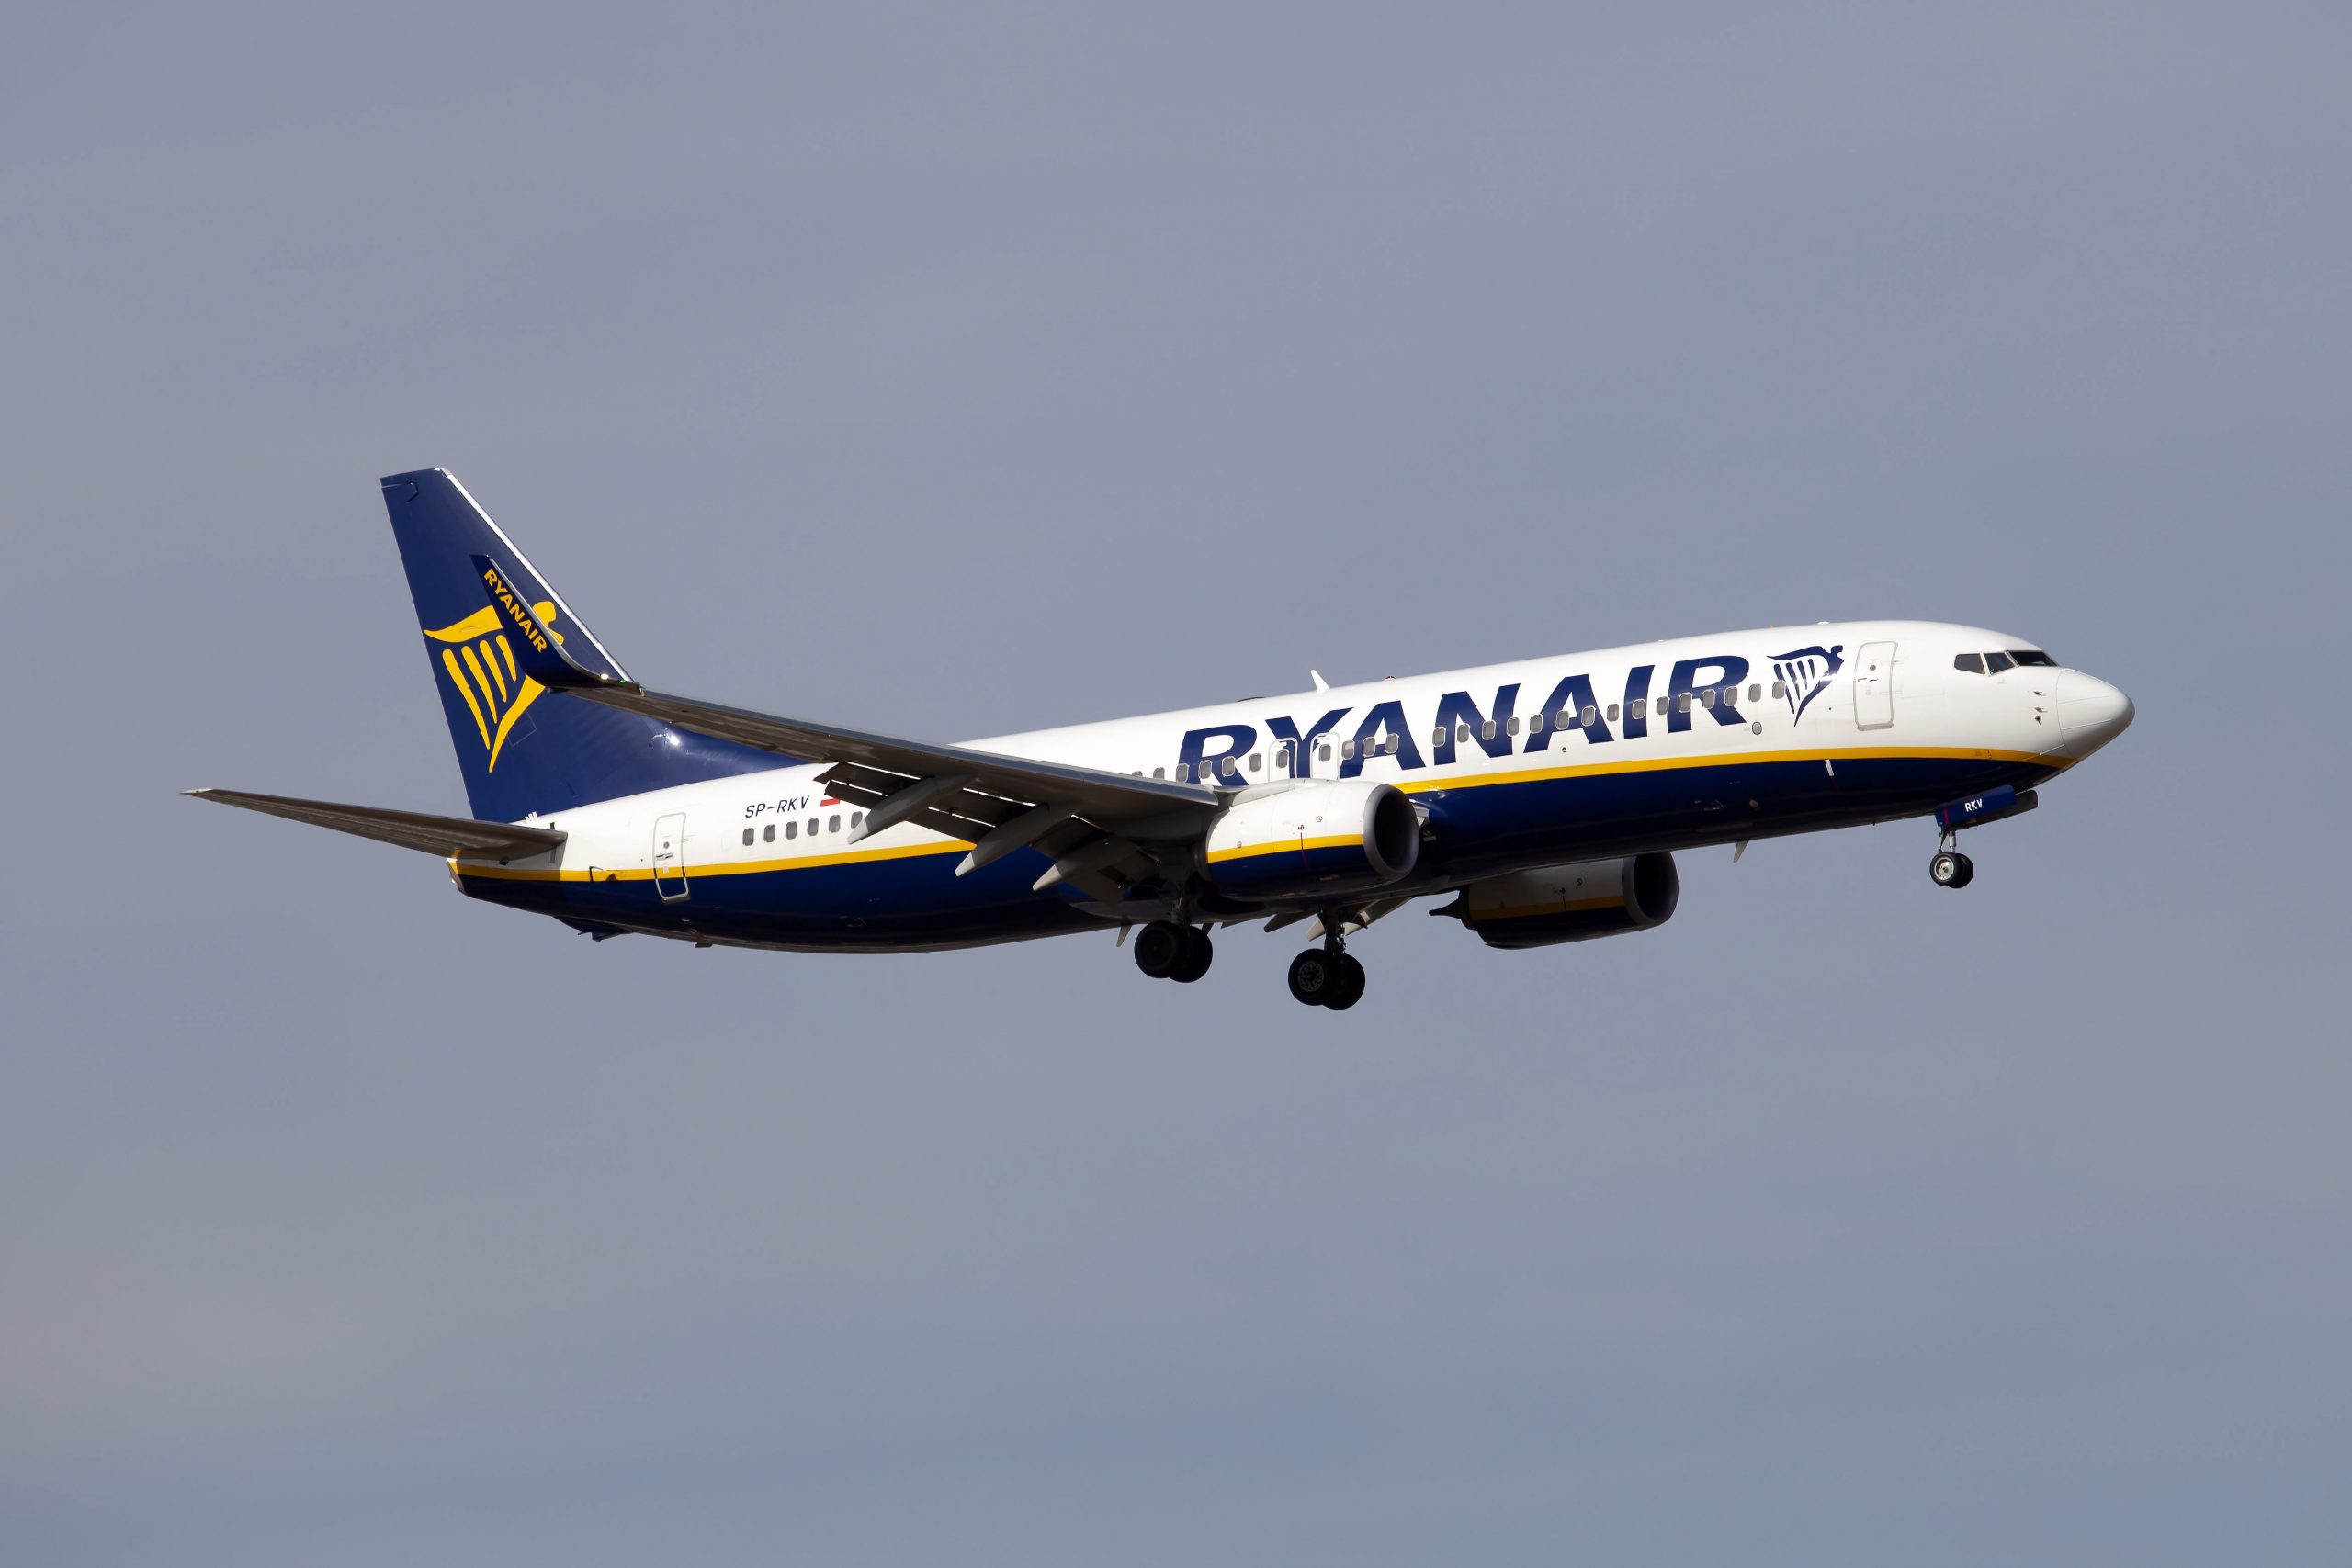 Drunk British passengers consume airport booze and perform sex acts in front on children on Ryanair flight to Spain's Canary Islands